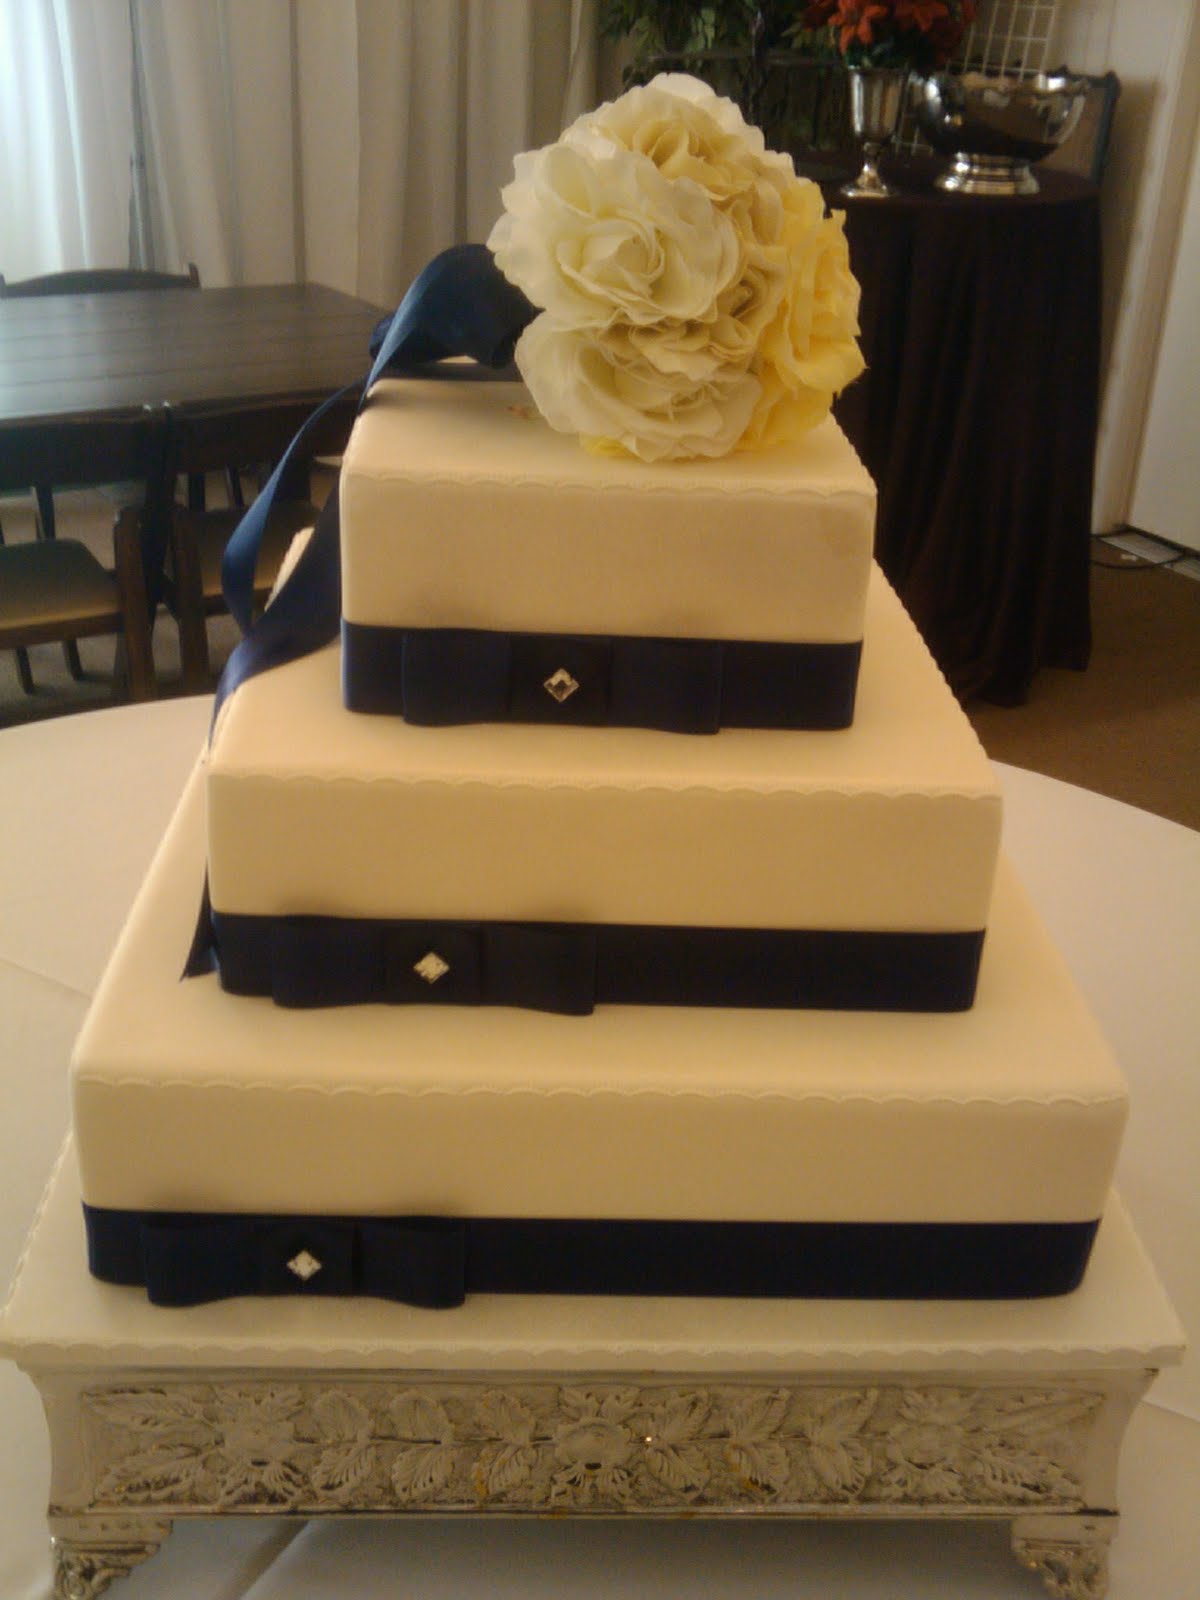 A white wedding cake can be